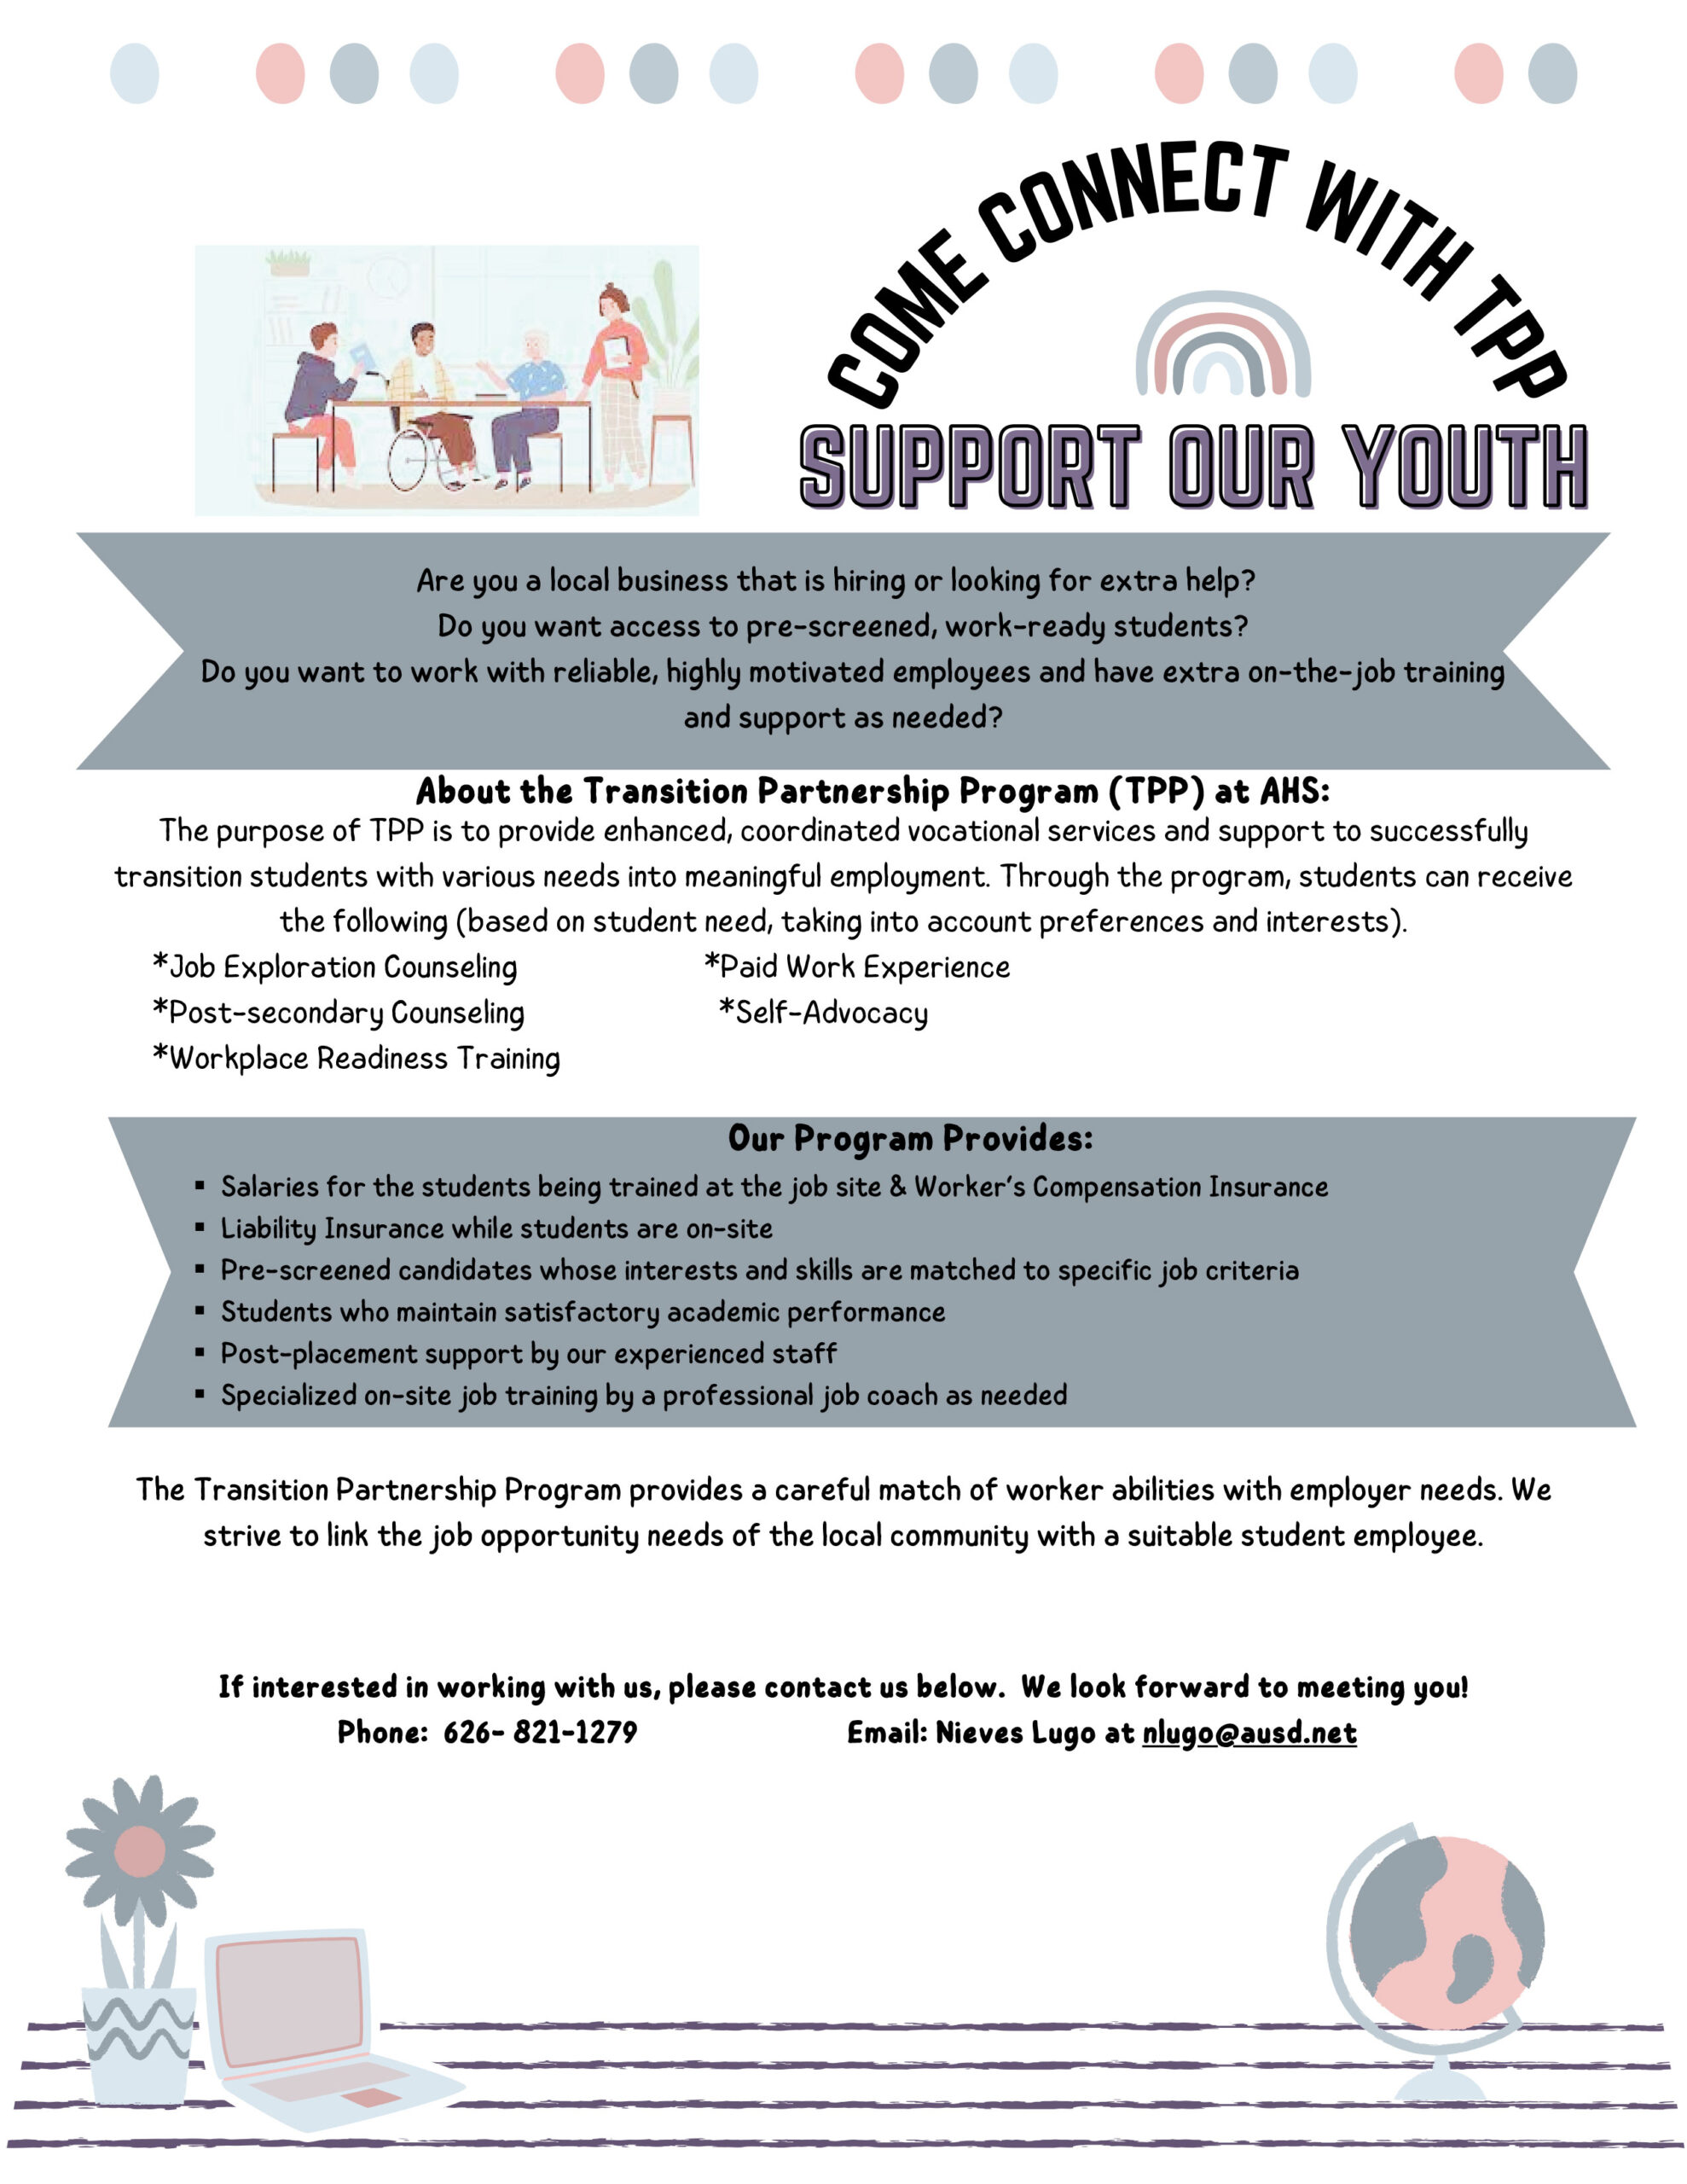 Support youth with TTP program at Arcadia Unified High School